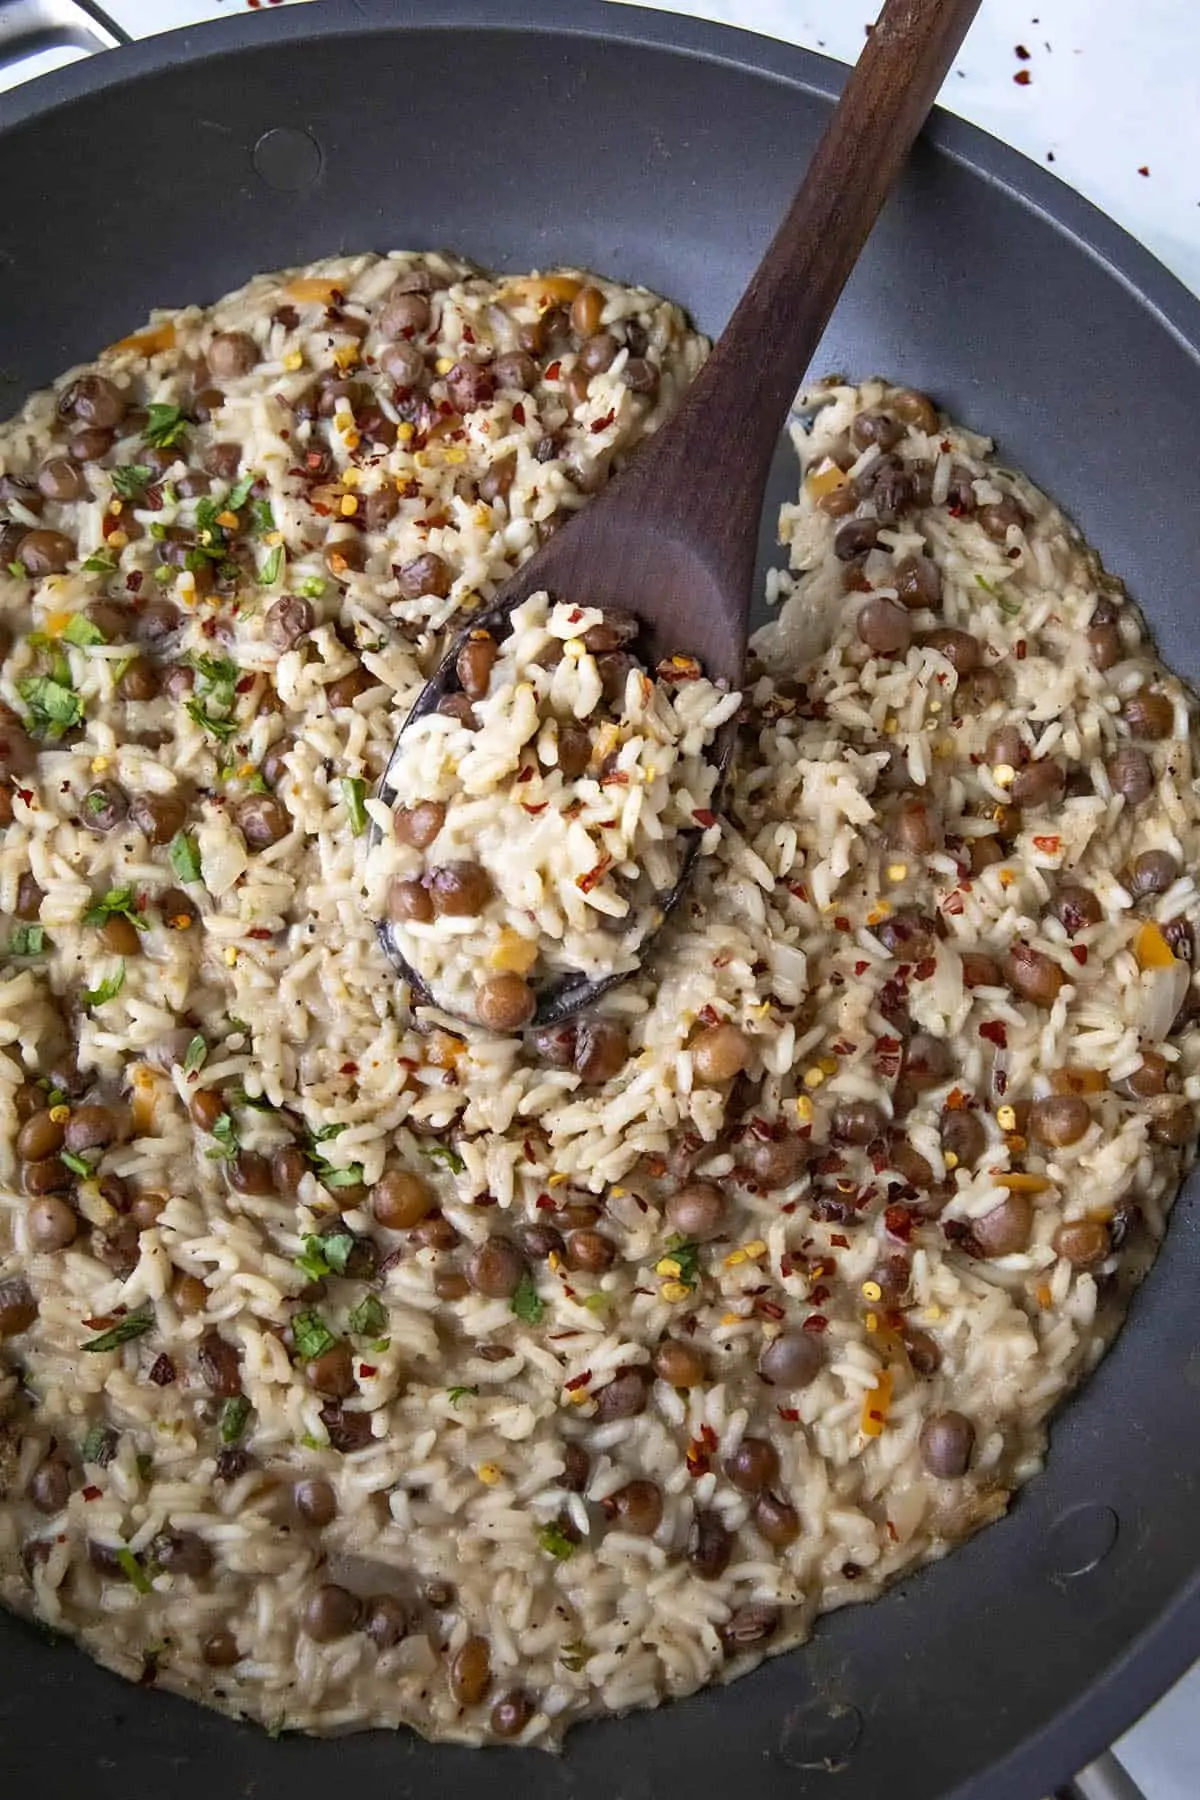 Serving Jamaican Rice and Peas from the pan.